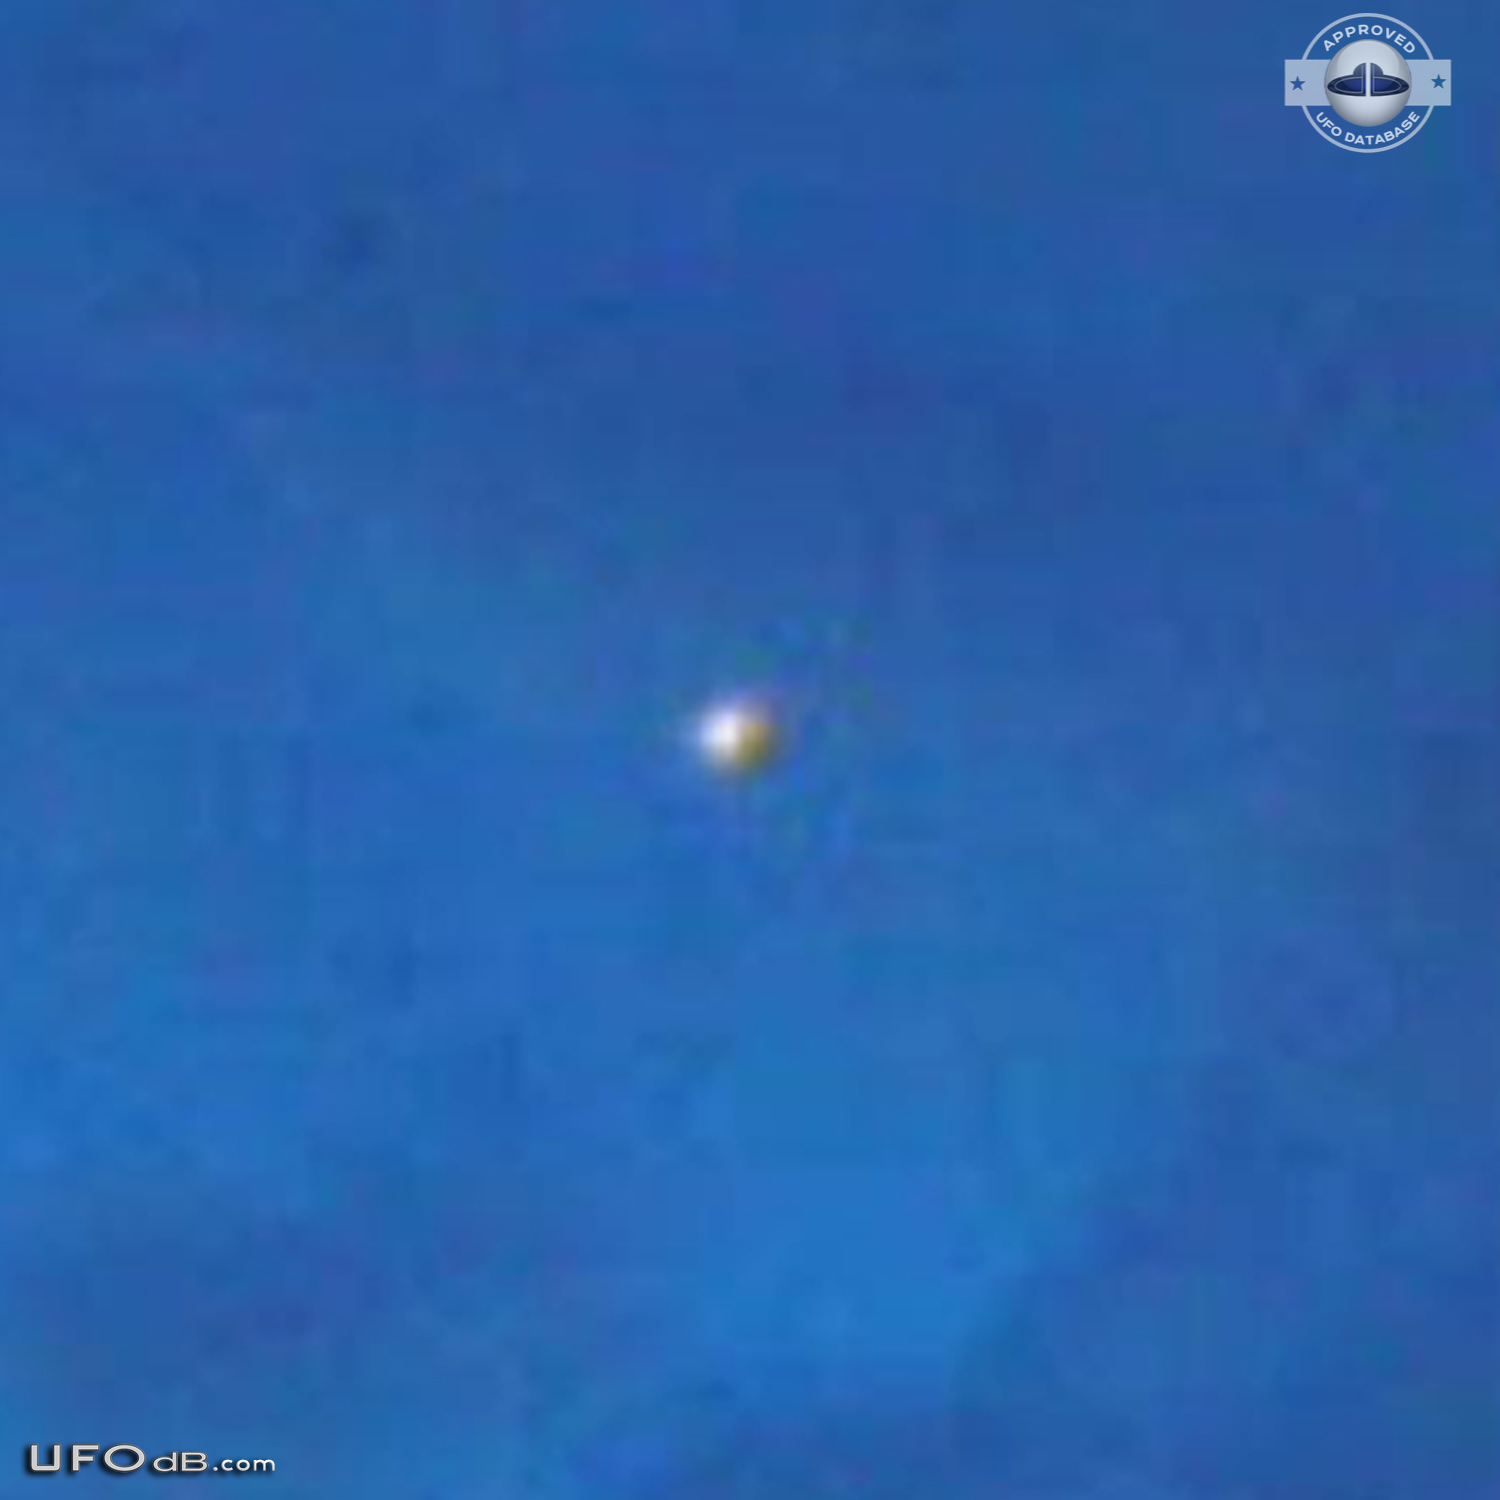 Fleet of 7 ufos changing color caught on photo over Riga, Latvia 2010 UFO Picture #405-4